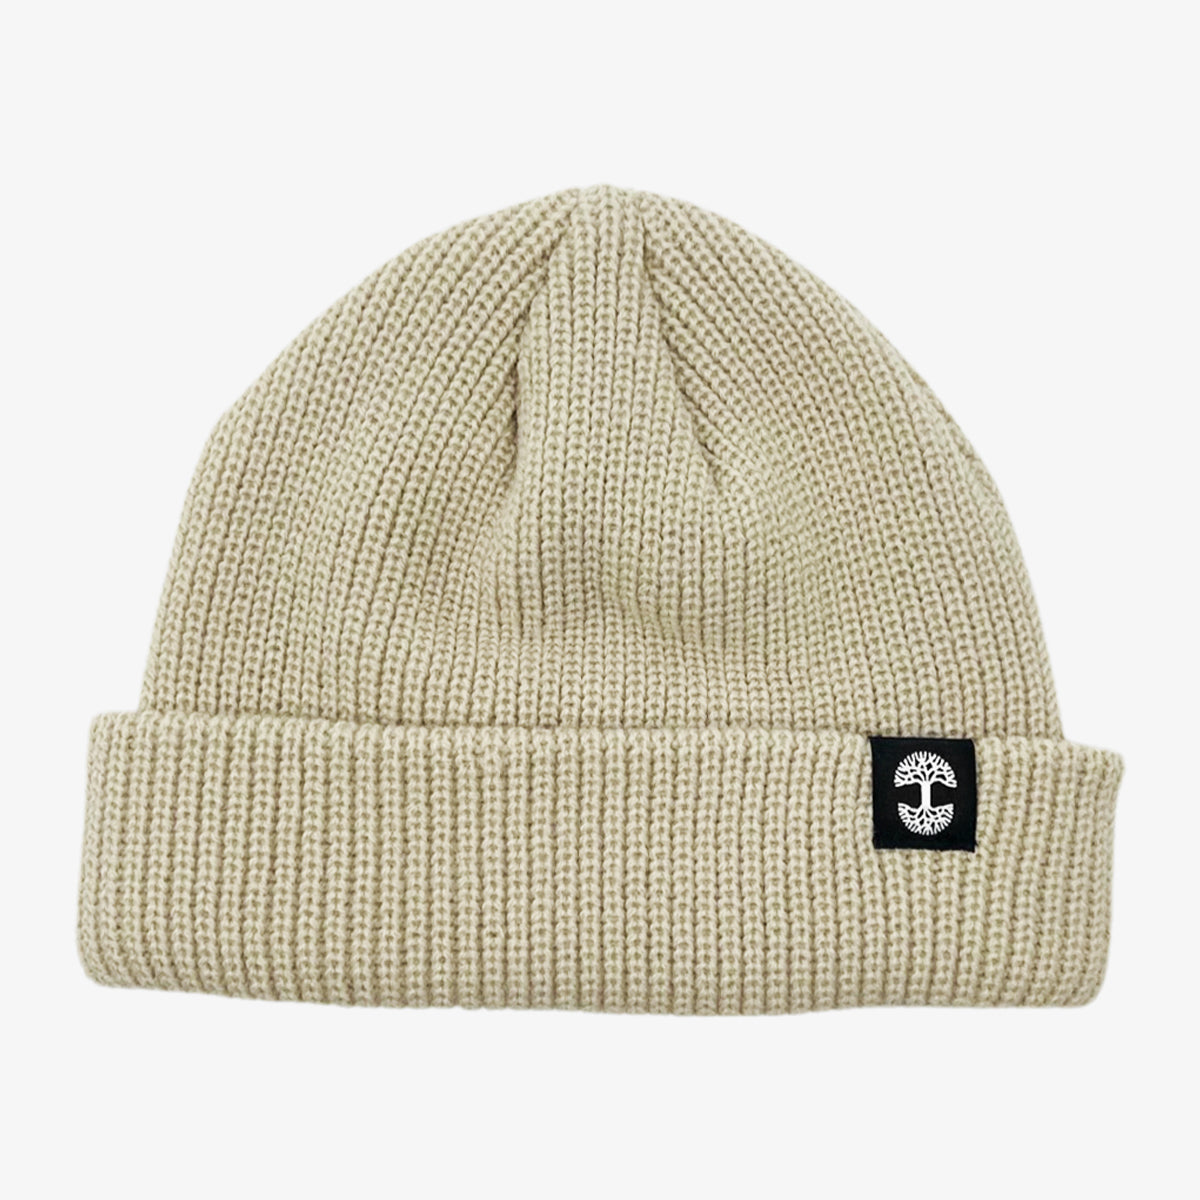 Shallow fit cream cuffed beanie with black and white Oaklandish tree logo tag on the left wear side.